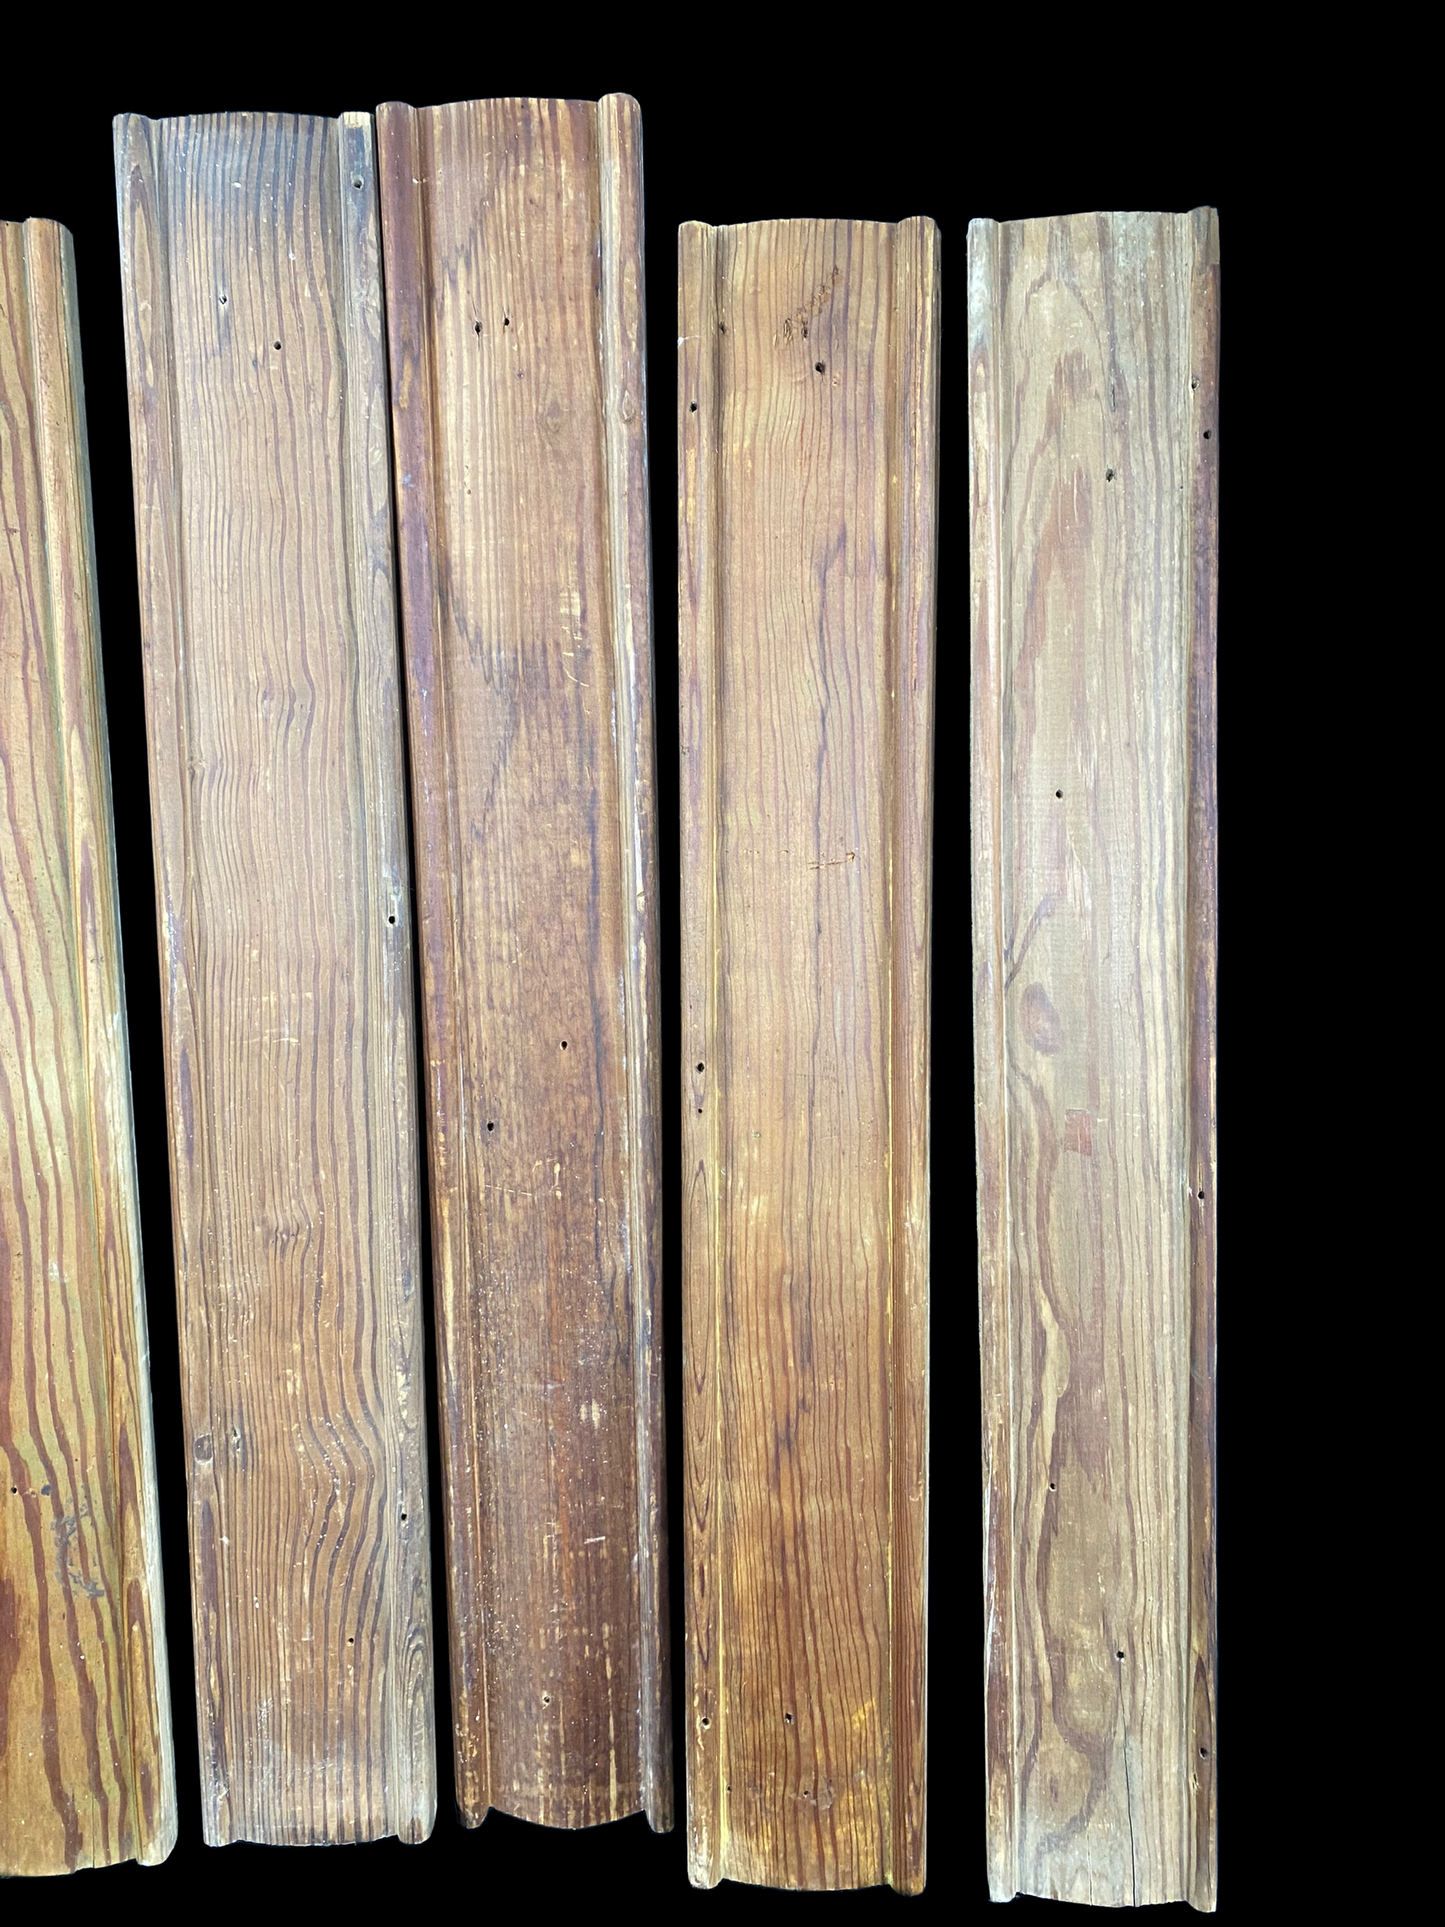 7 Wood Trim Pieces, Architectural Salvage, Reclaimed Vintage Wood Baseboard A55